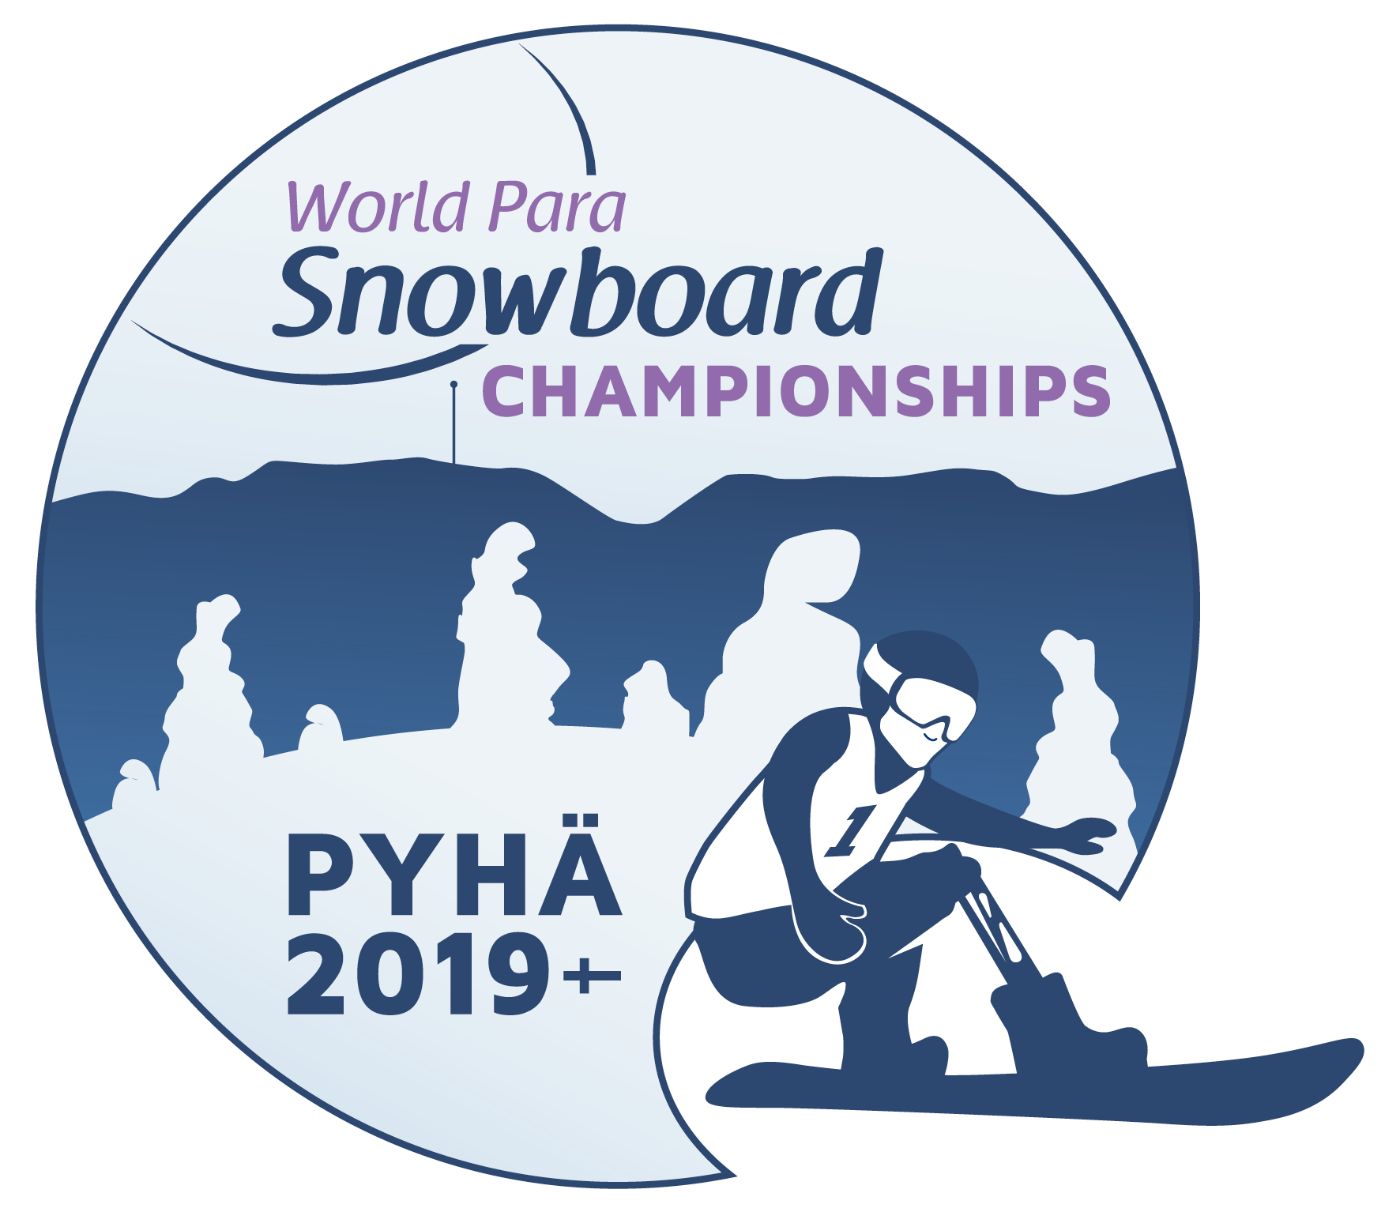 the official logo of the Pyha 2019 World Para Snowboard Championships